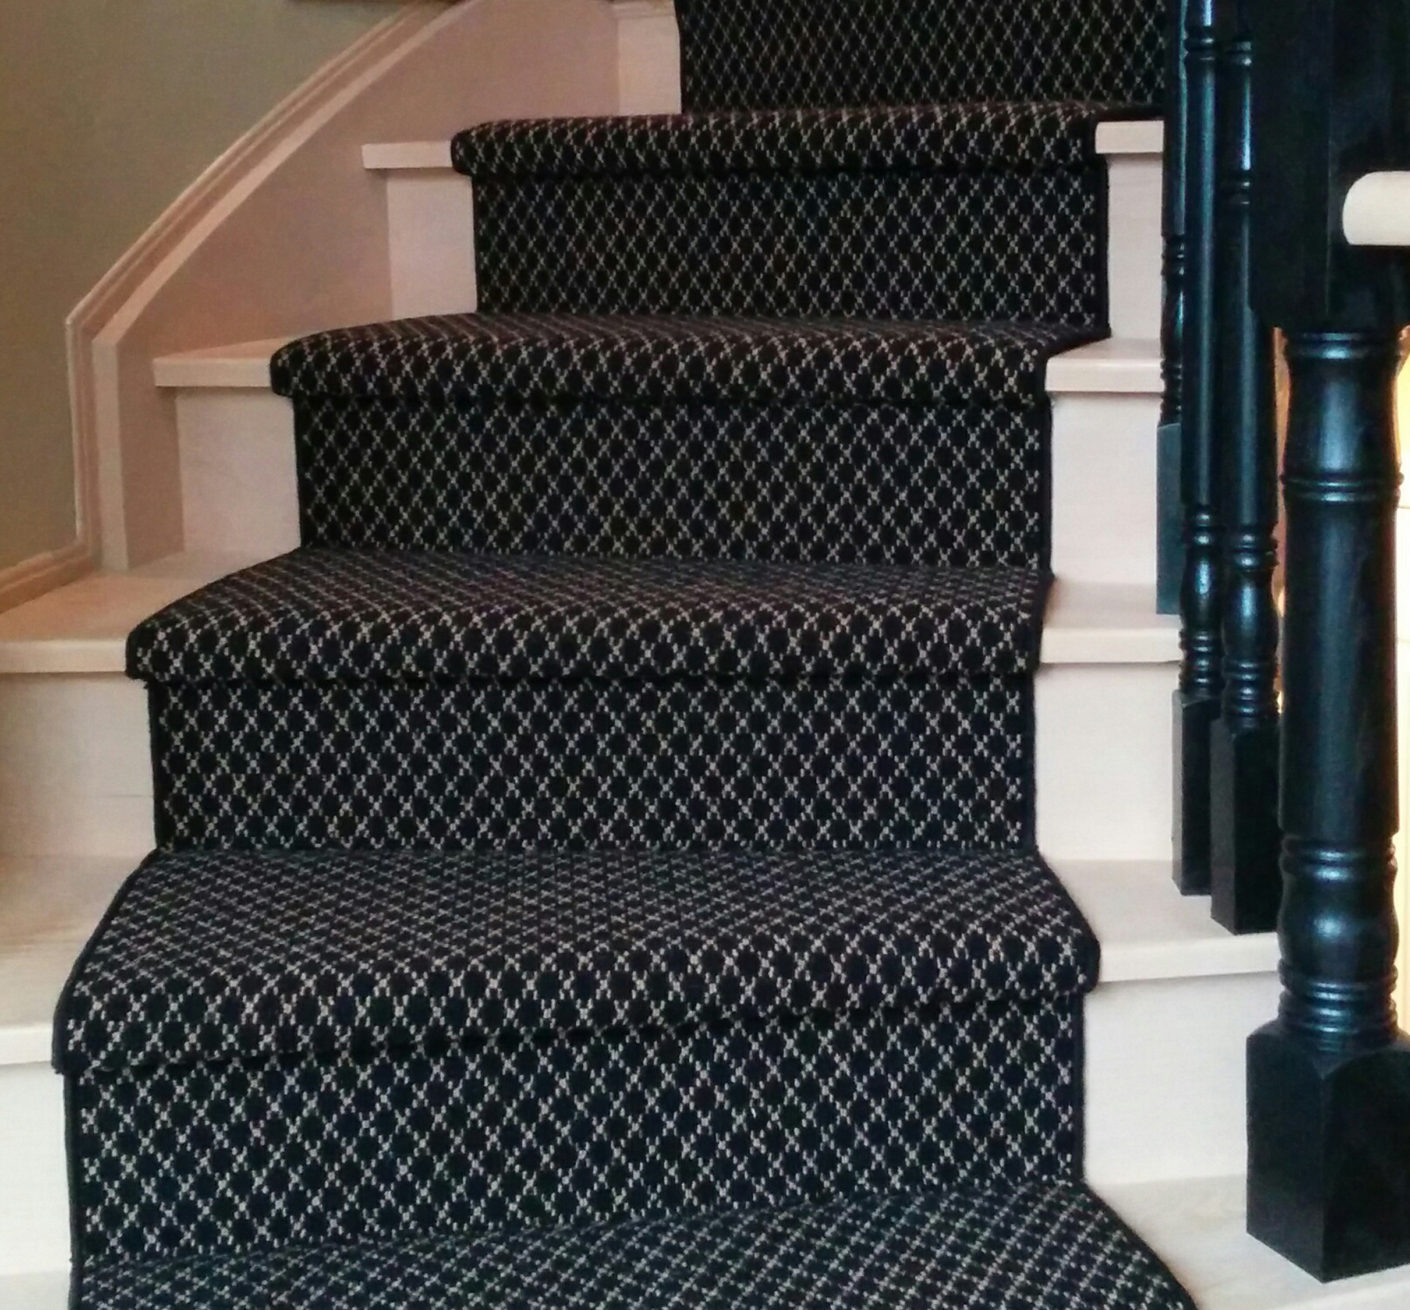 Black and White Wool Carpet Stair Runners on spiral Staircase in Toronto ideas, Wool Carpet Runner King City